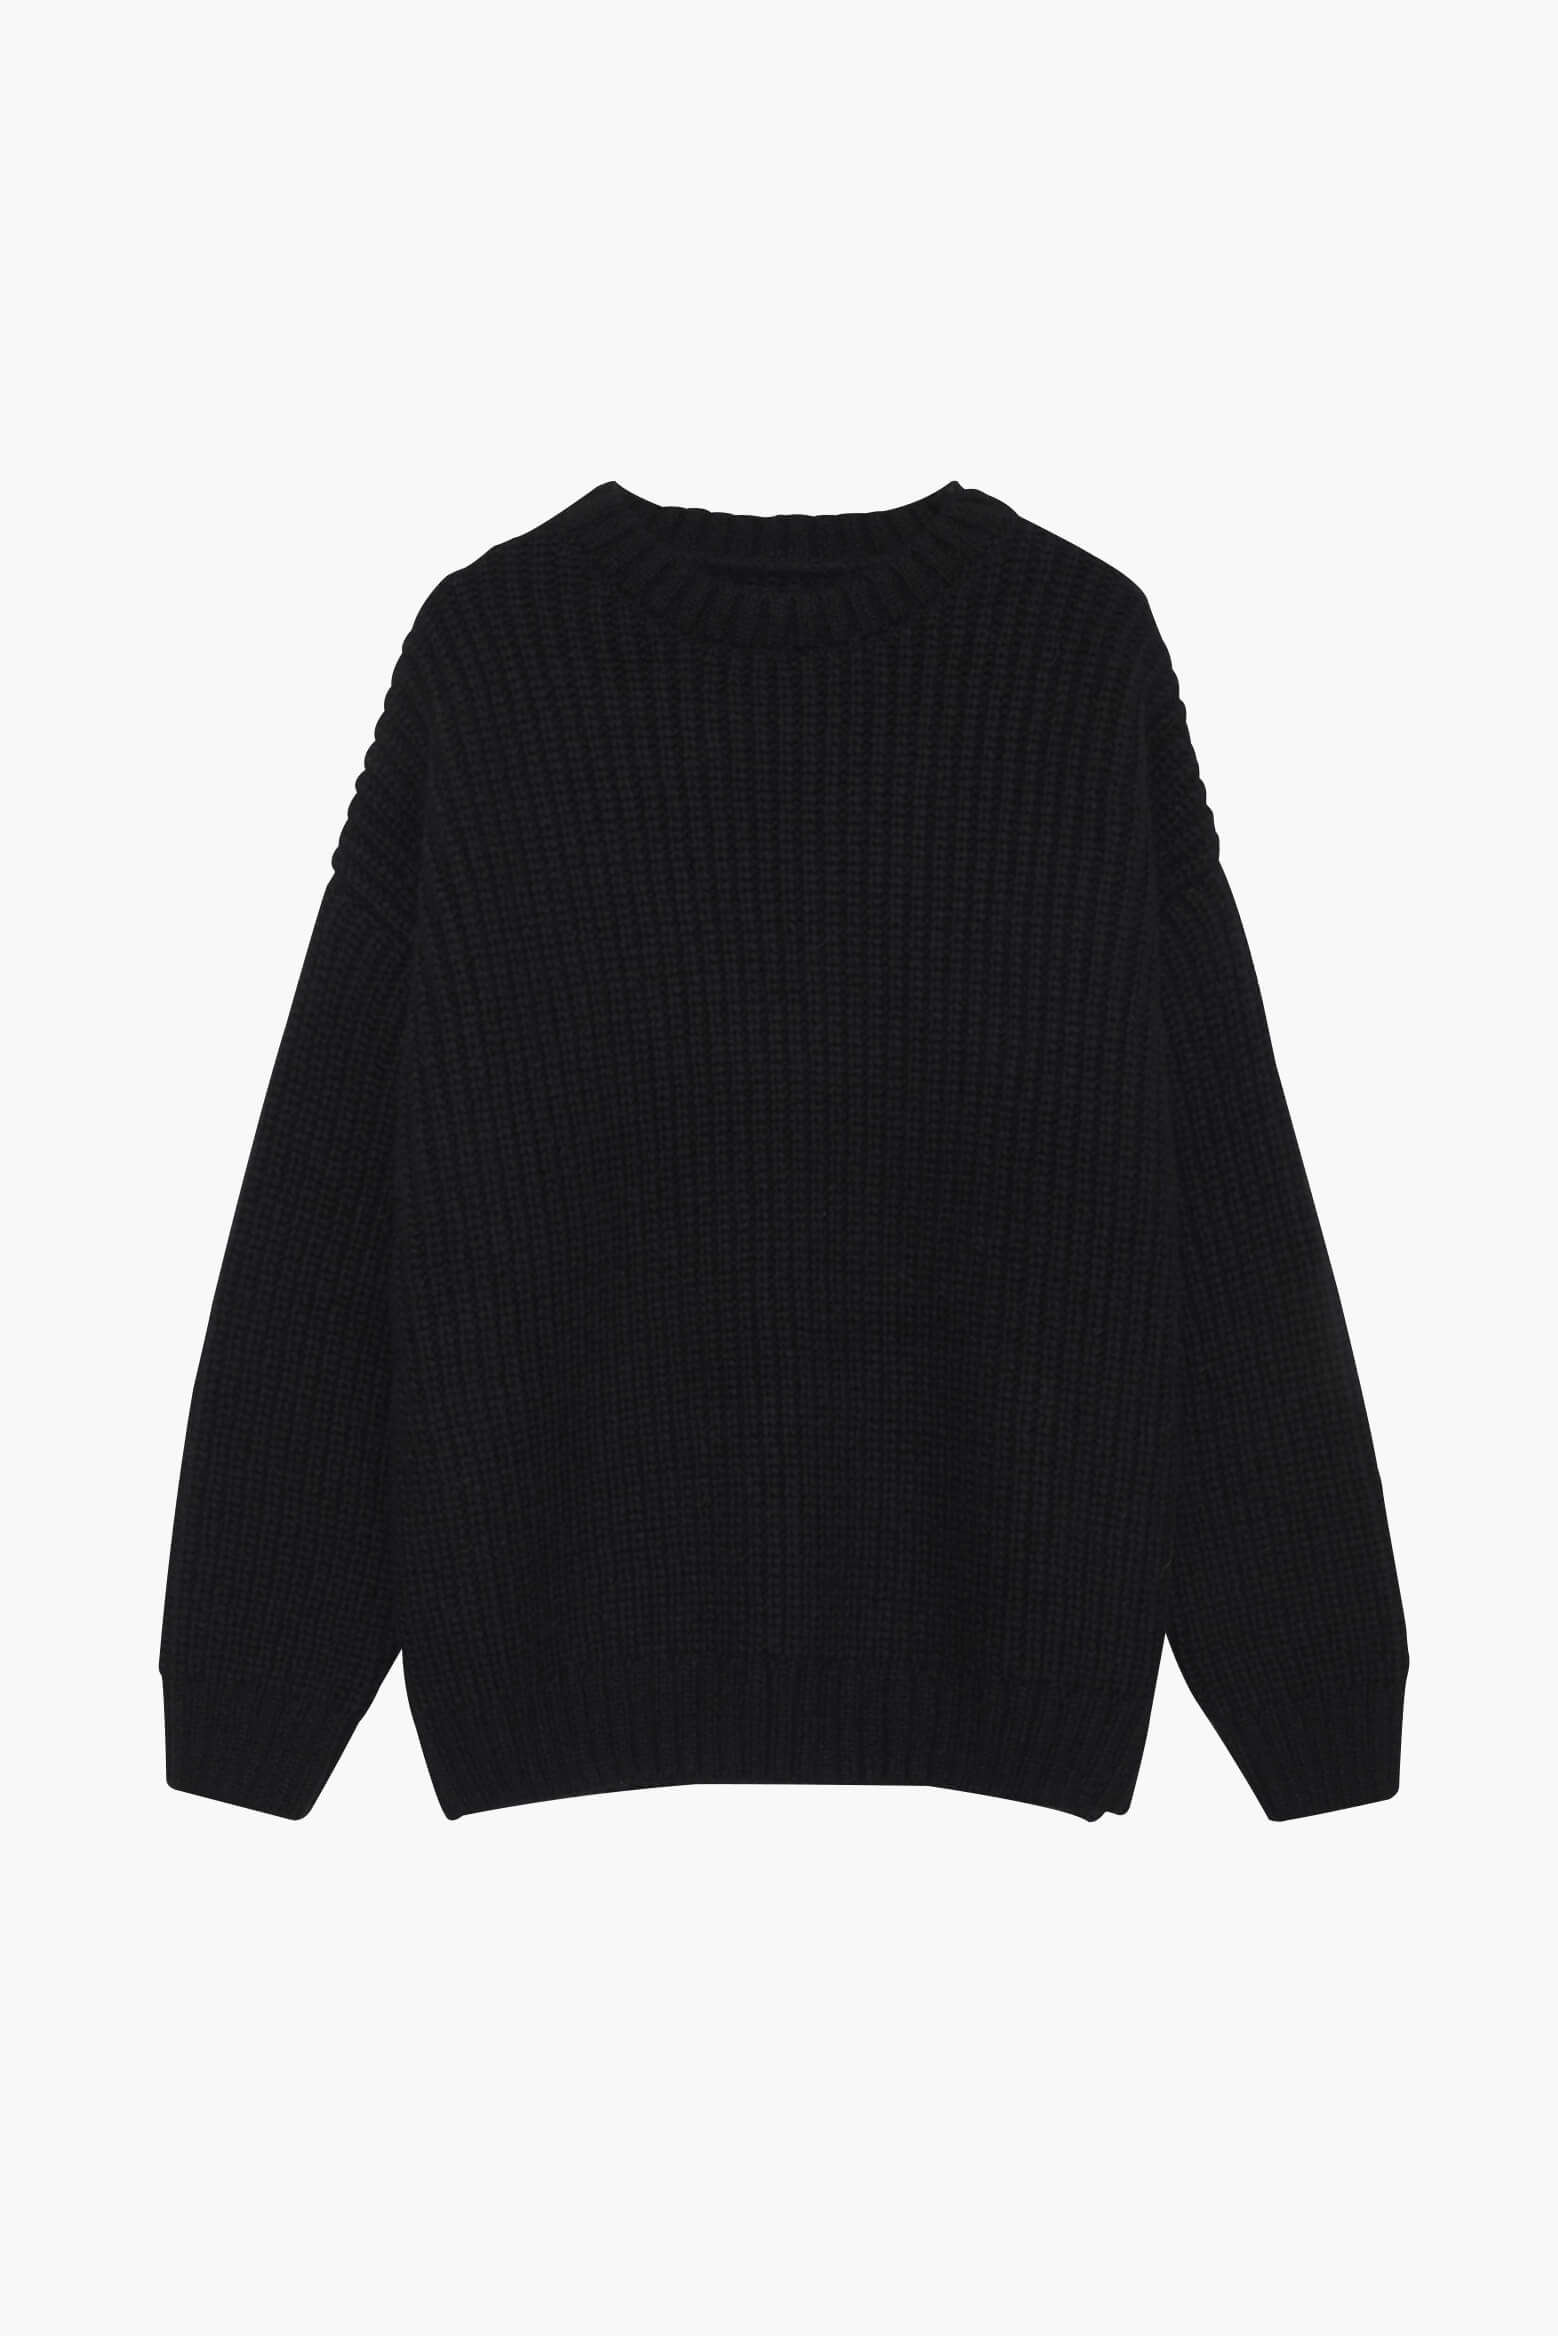 Anine Bing Sydney Crew Sweater in Black available at TNT The New Trend Australia.